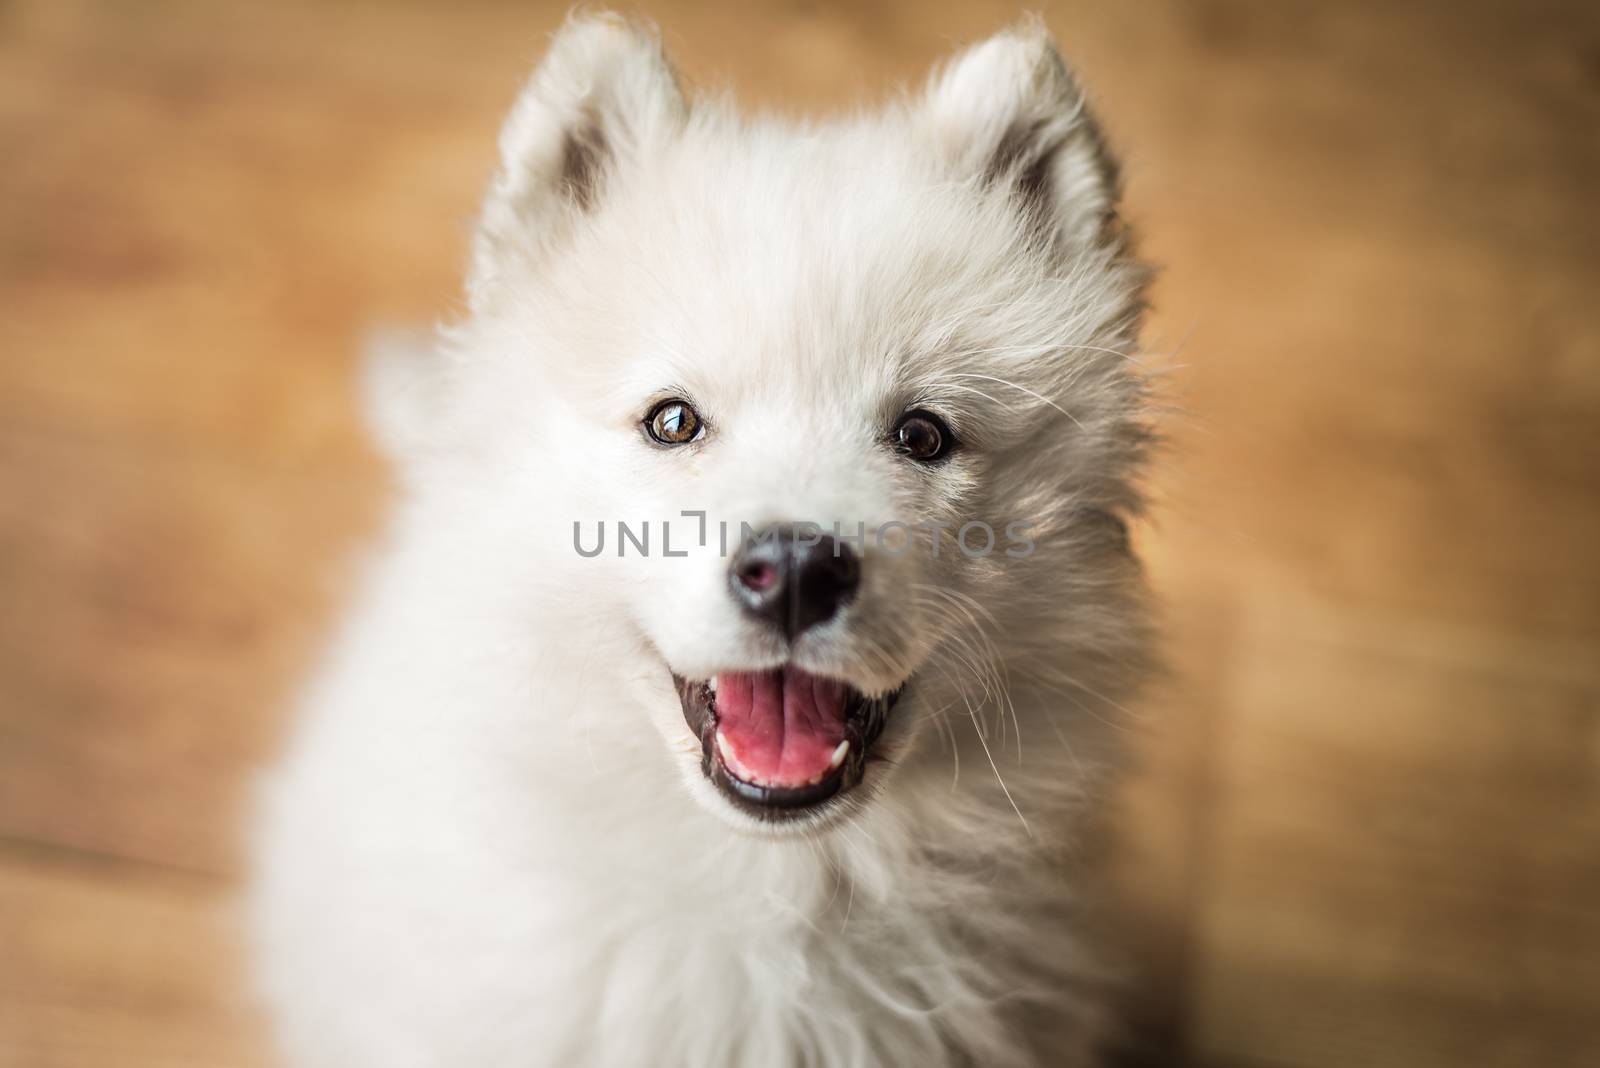 Cute, young, playful Samoyed puppy indoors looks up at the camera with a happy expression and a smile